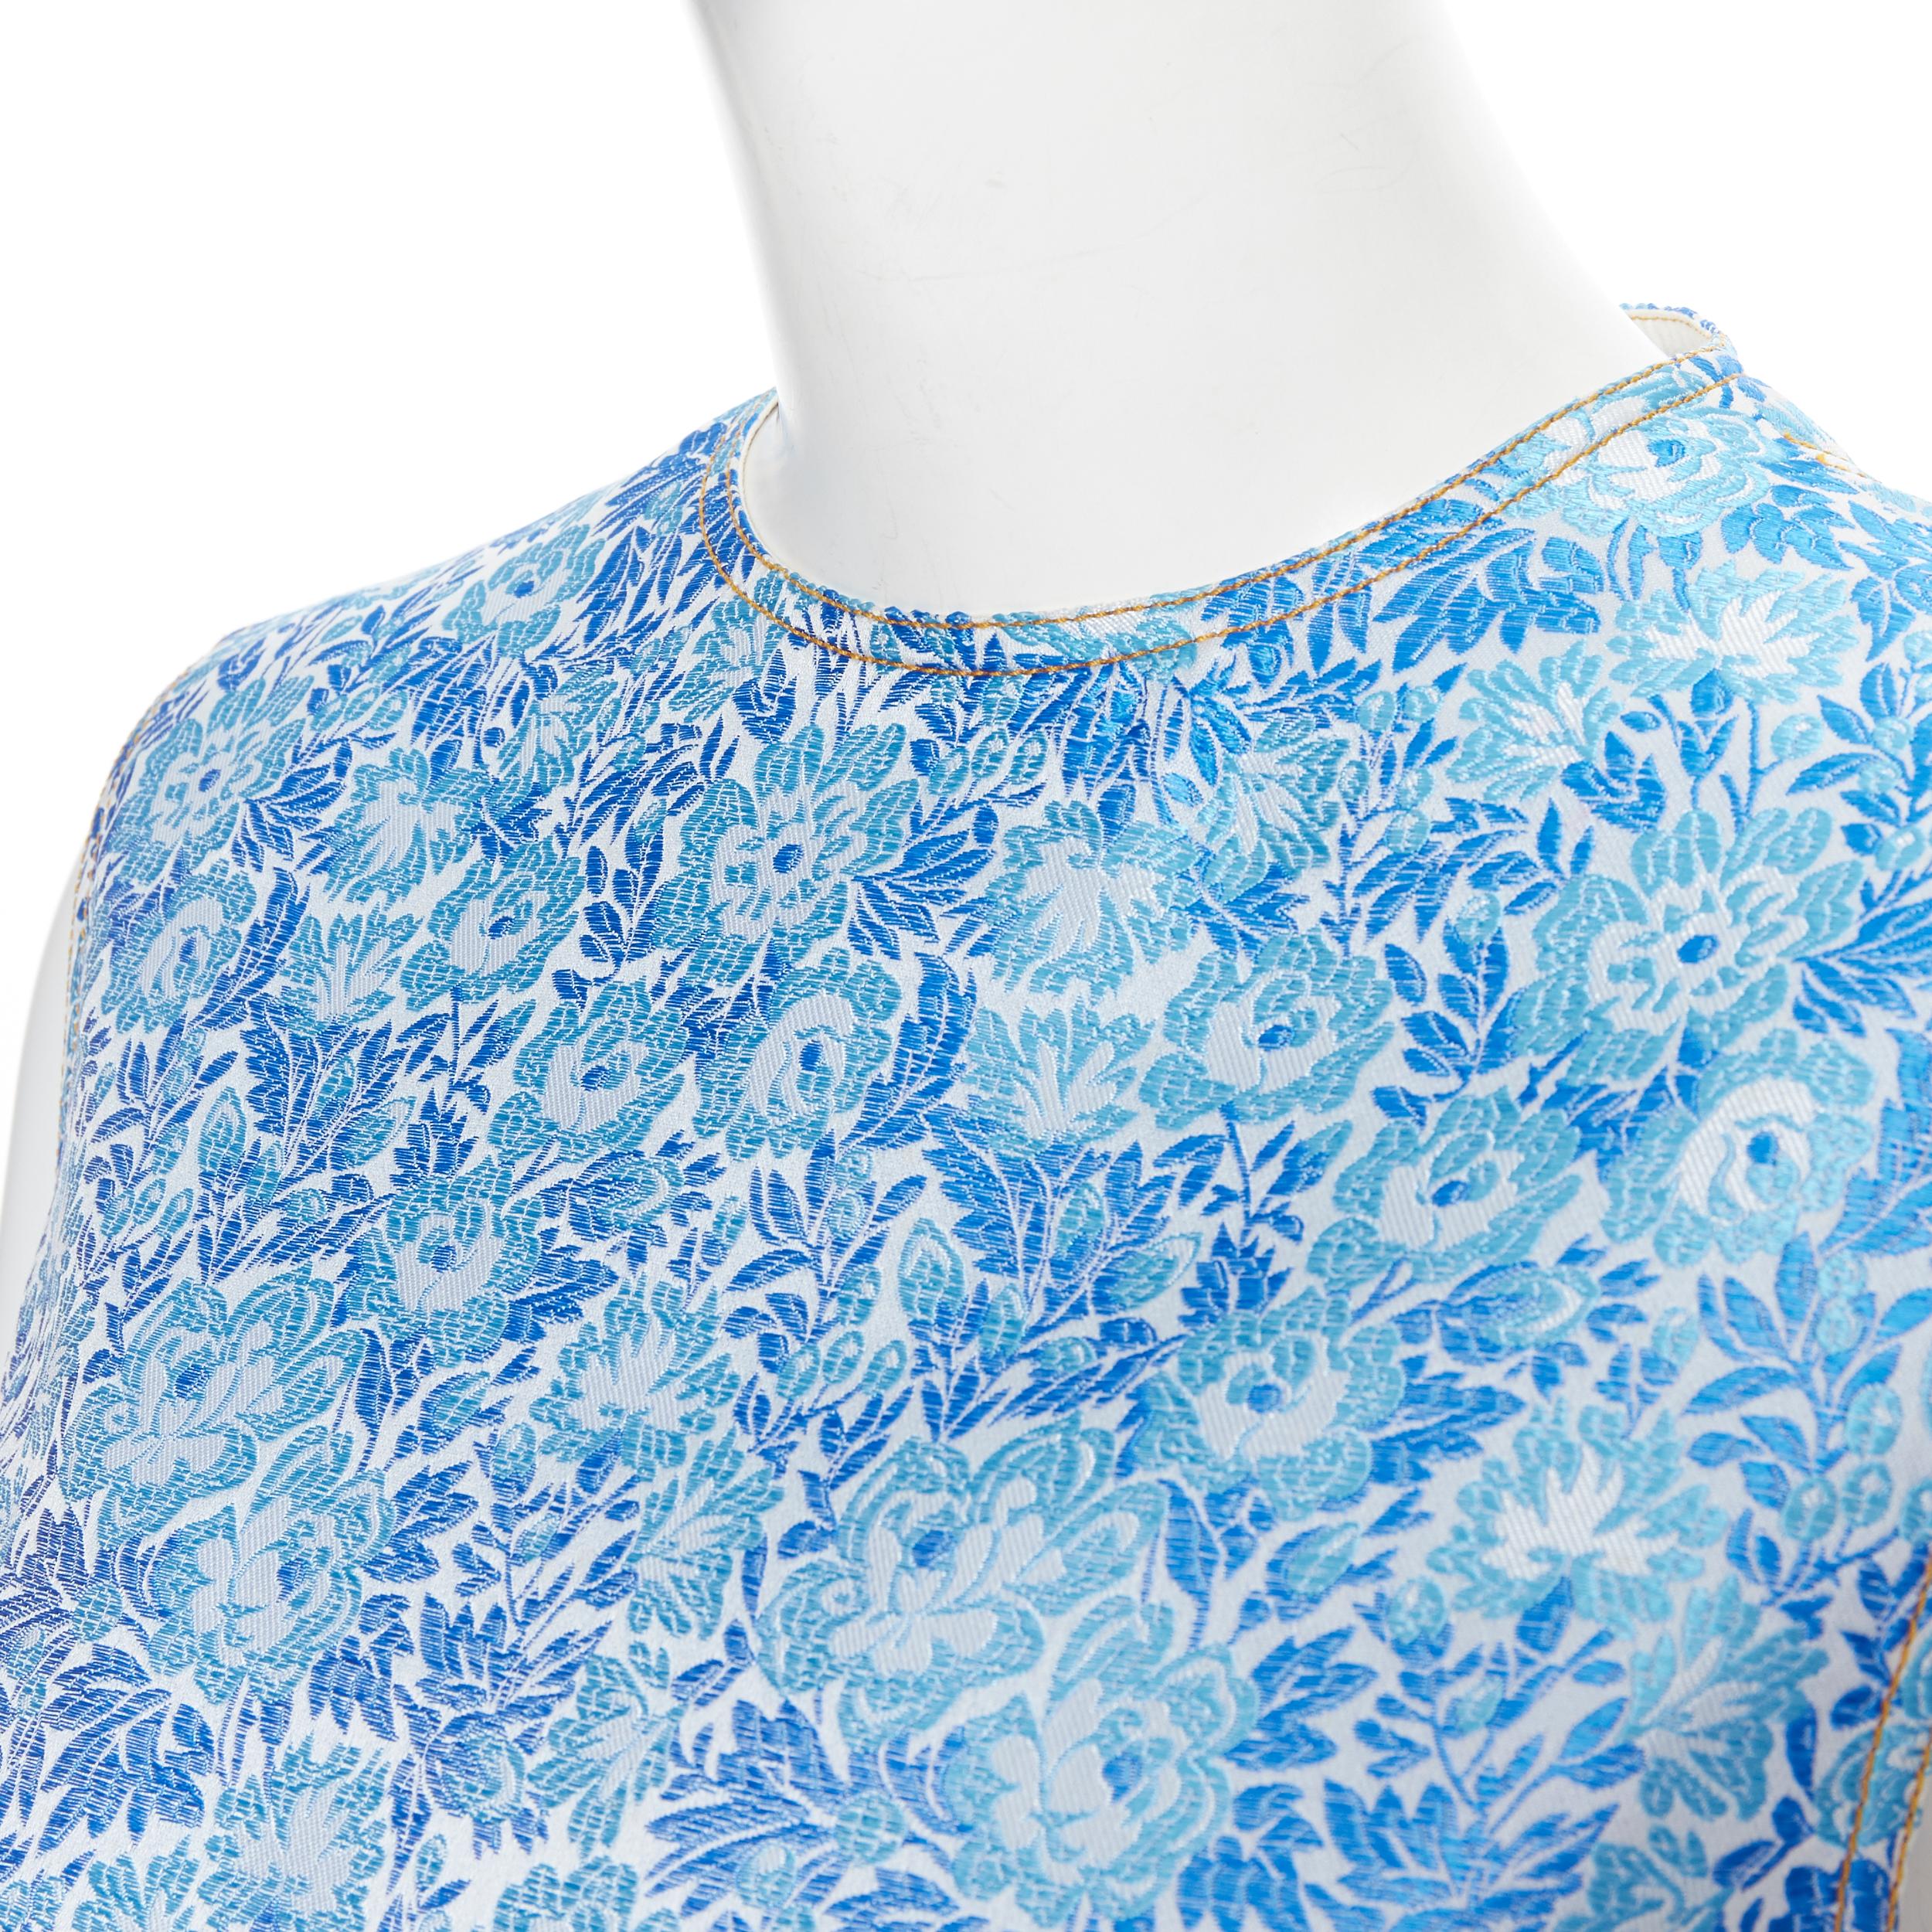 CALVIN KLEIN 205W39NYC RAF SIMONS blue floral jacquard sleeveless top Fr36 S 
Reference: LNKO/A01704 
Brand: Calvin Klein 
Designer: Raf Simons 
Material: Acetate 
Color: Blue 
Pattern: Floral 
Closure: Zip 
Extra Detail: Blue floral jacquard.